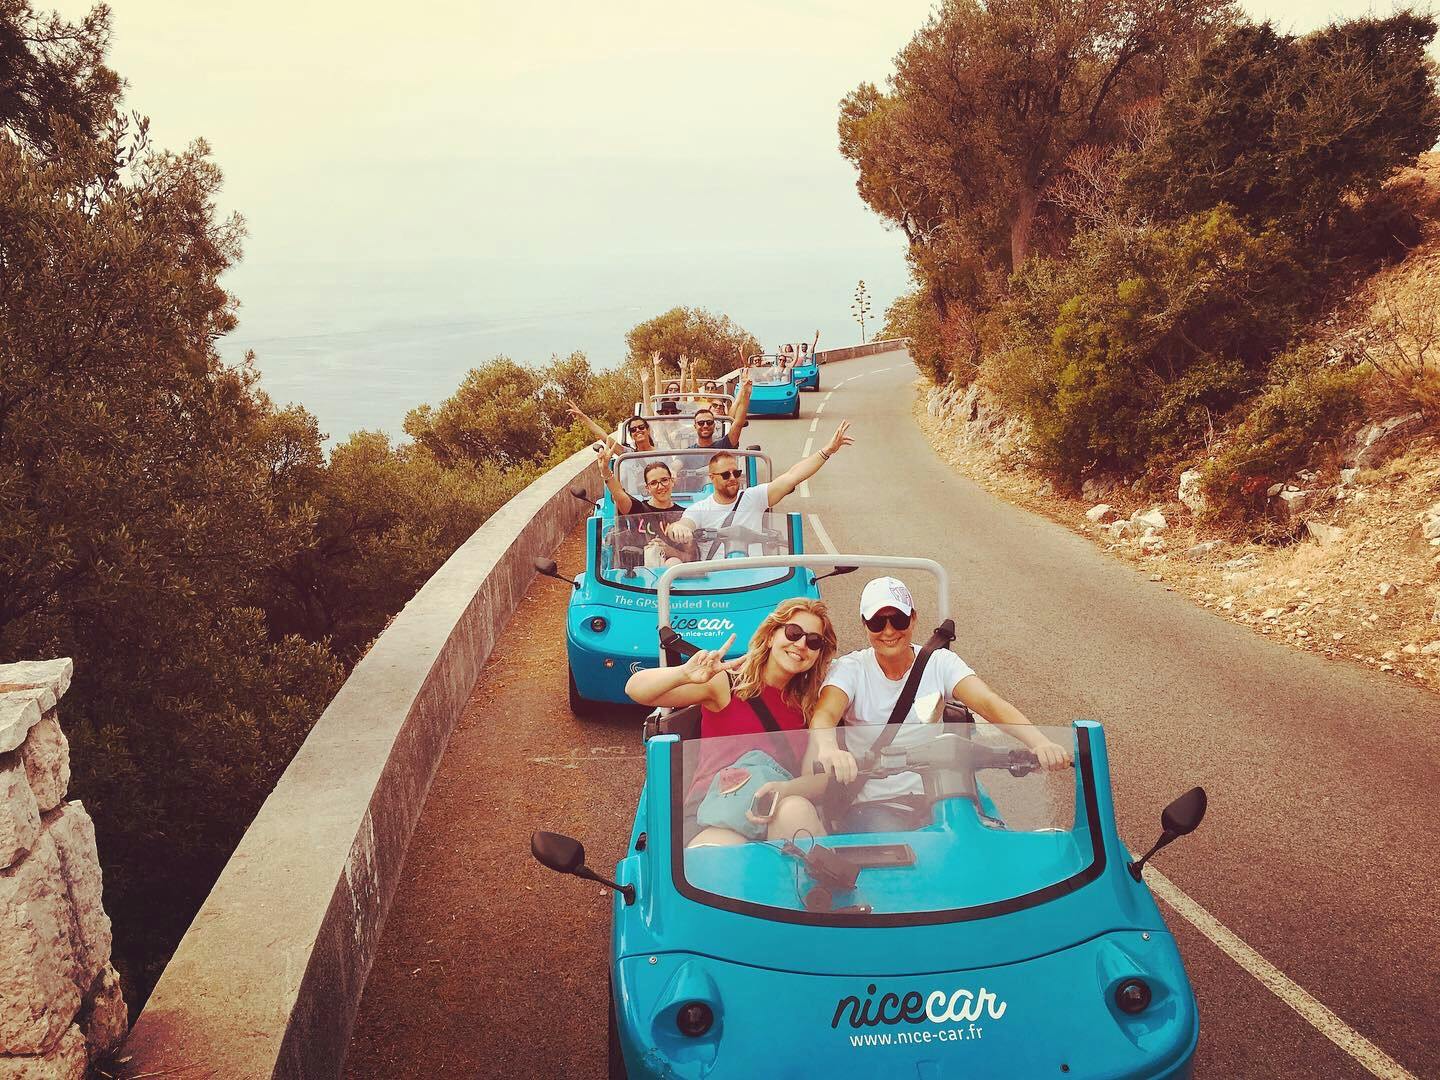 4-hour open-top car tour in the French Riviera